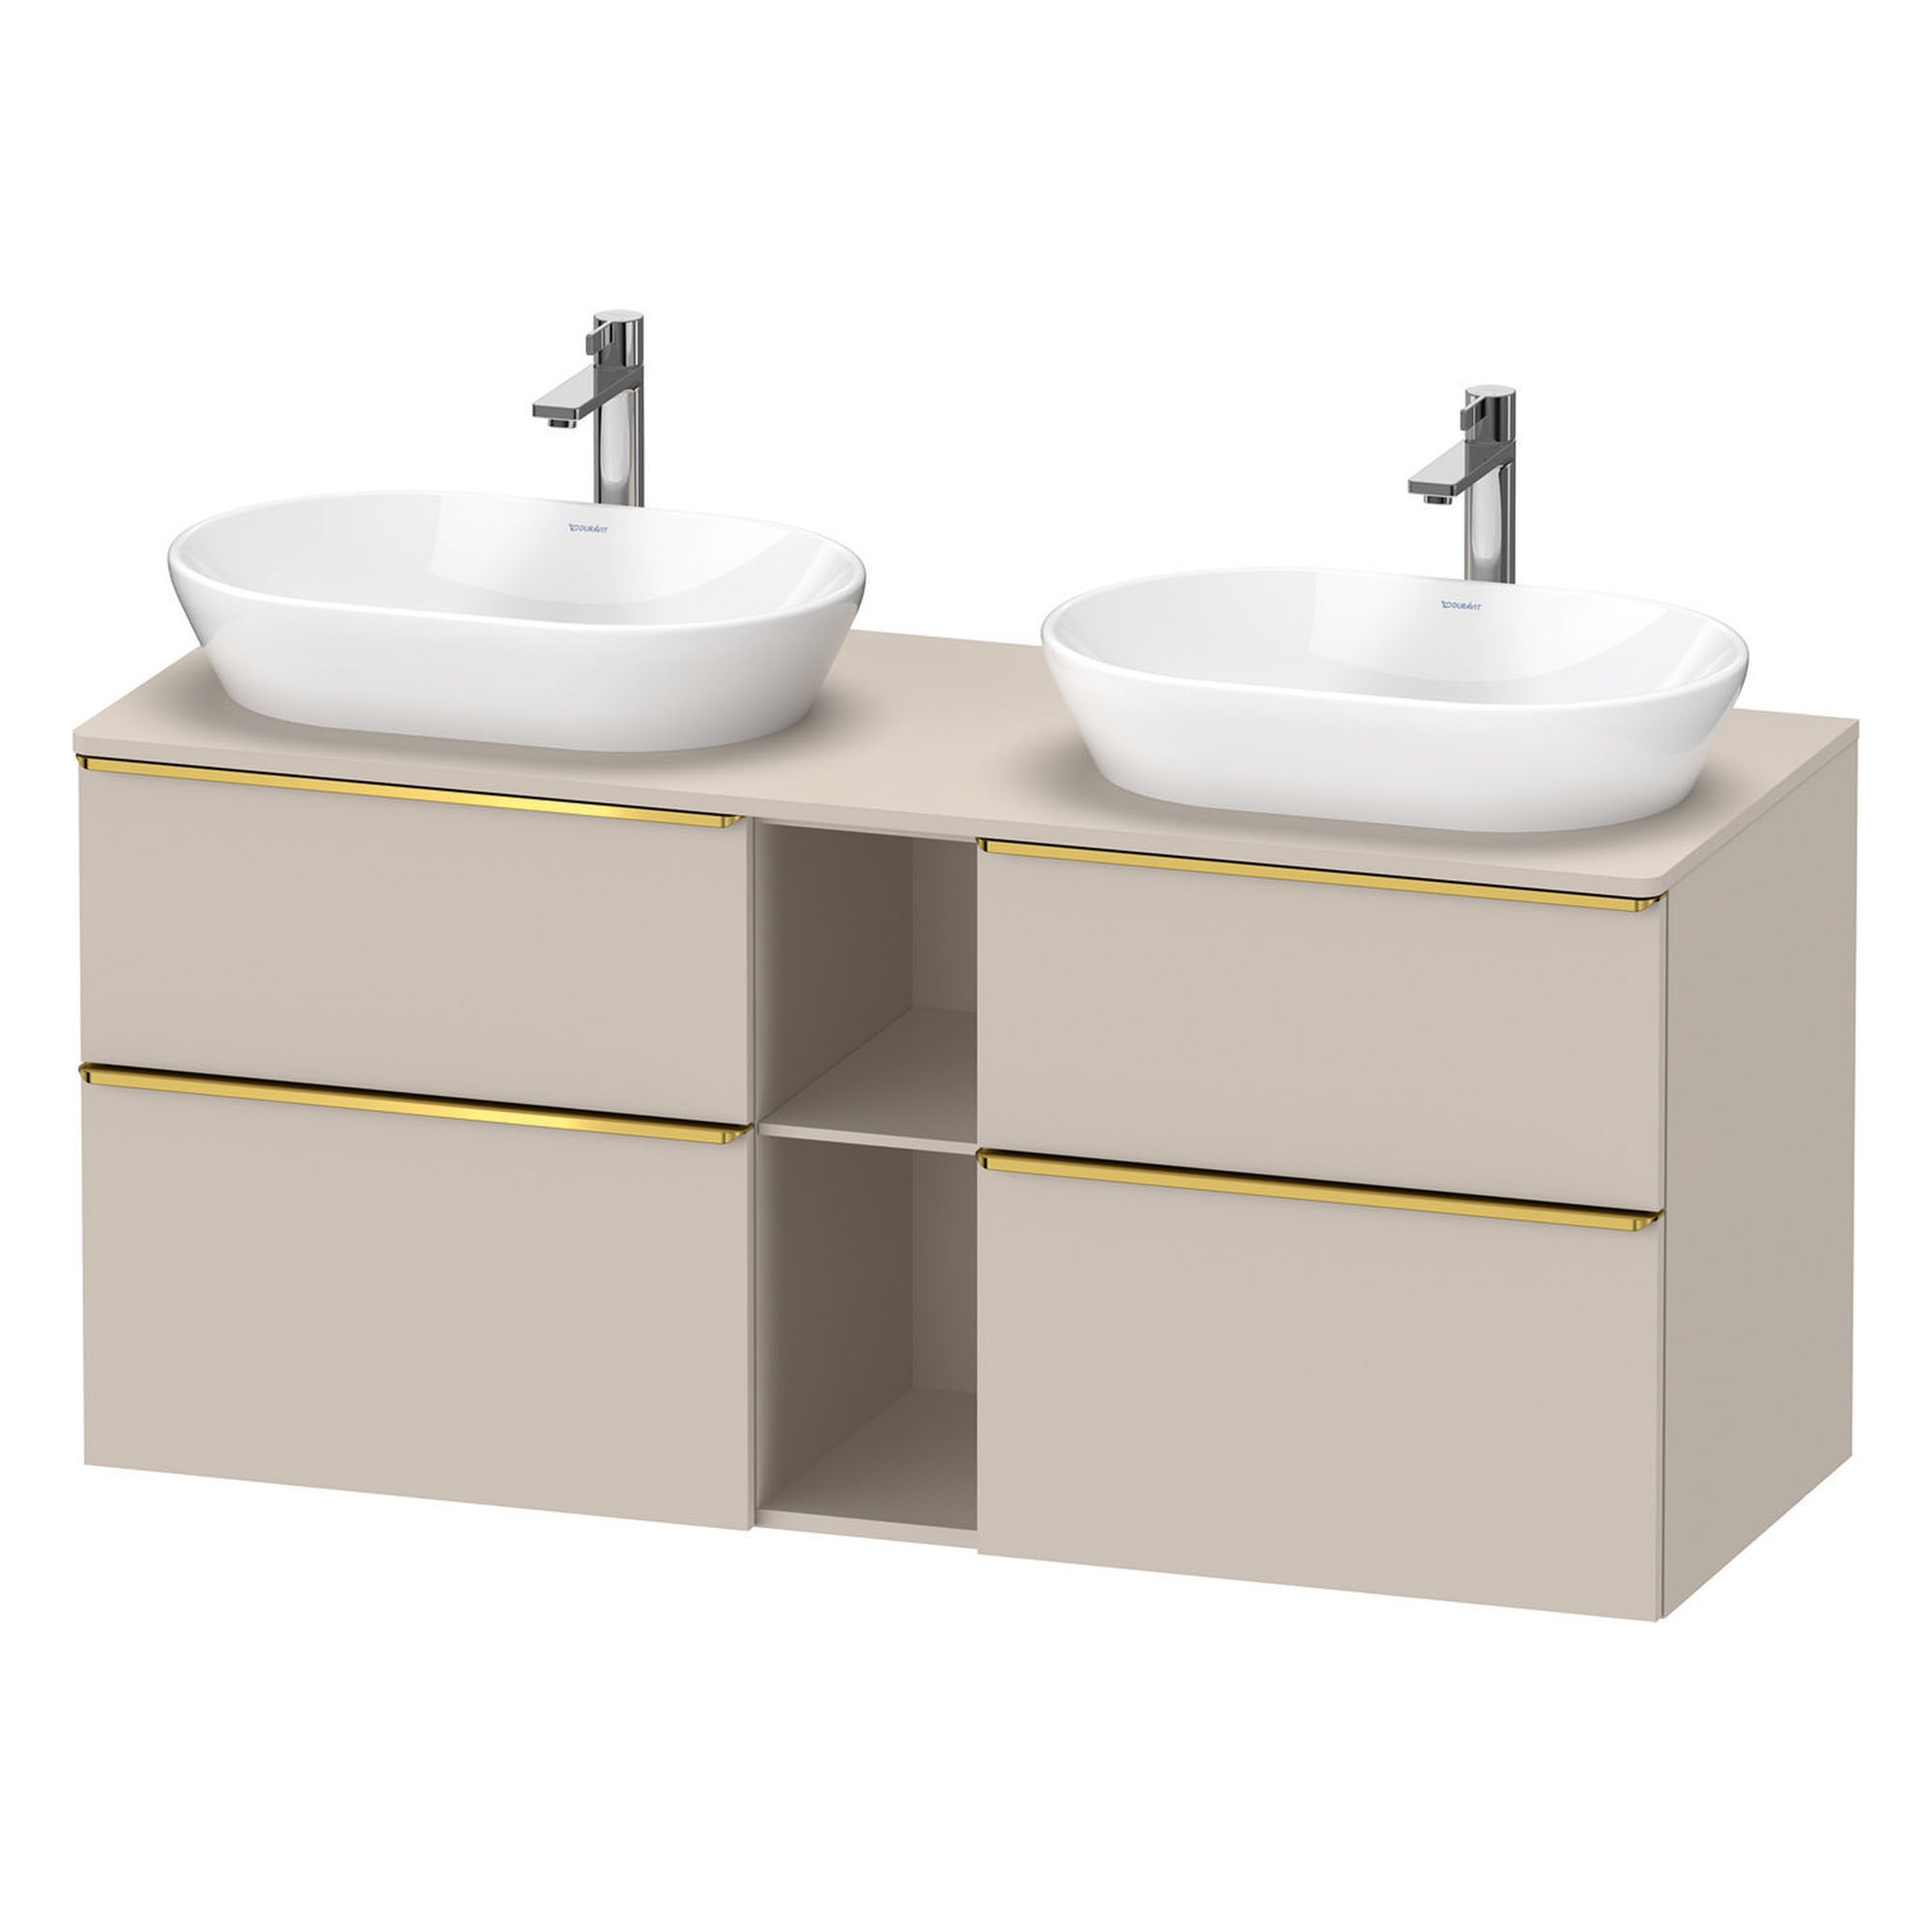 duravit d-neo 1400 wall mounted vanity unit with worktop 2 open shelves taupe gold handles